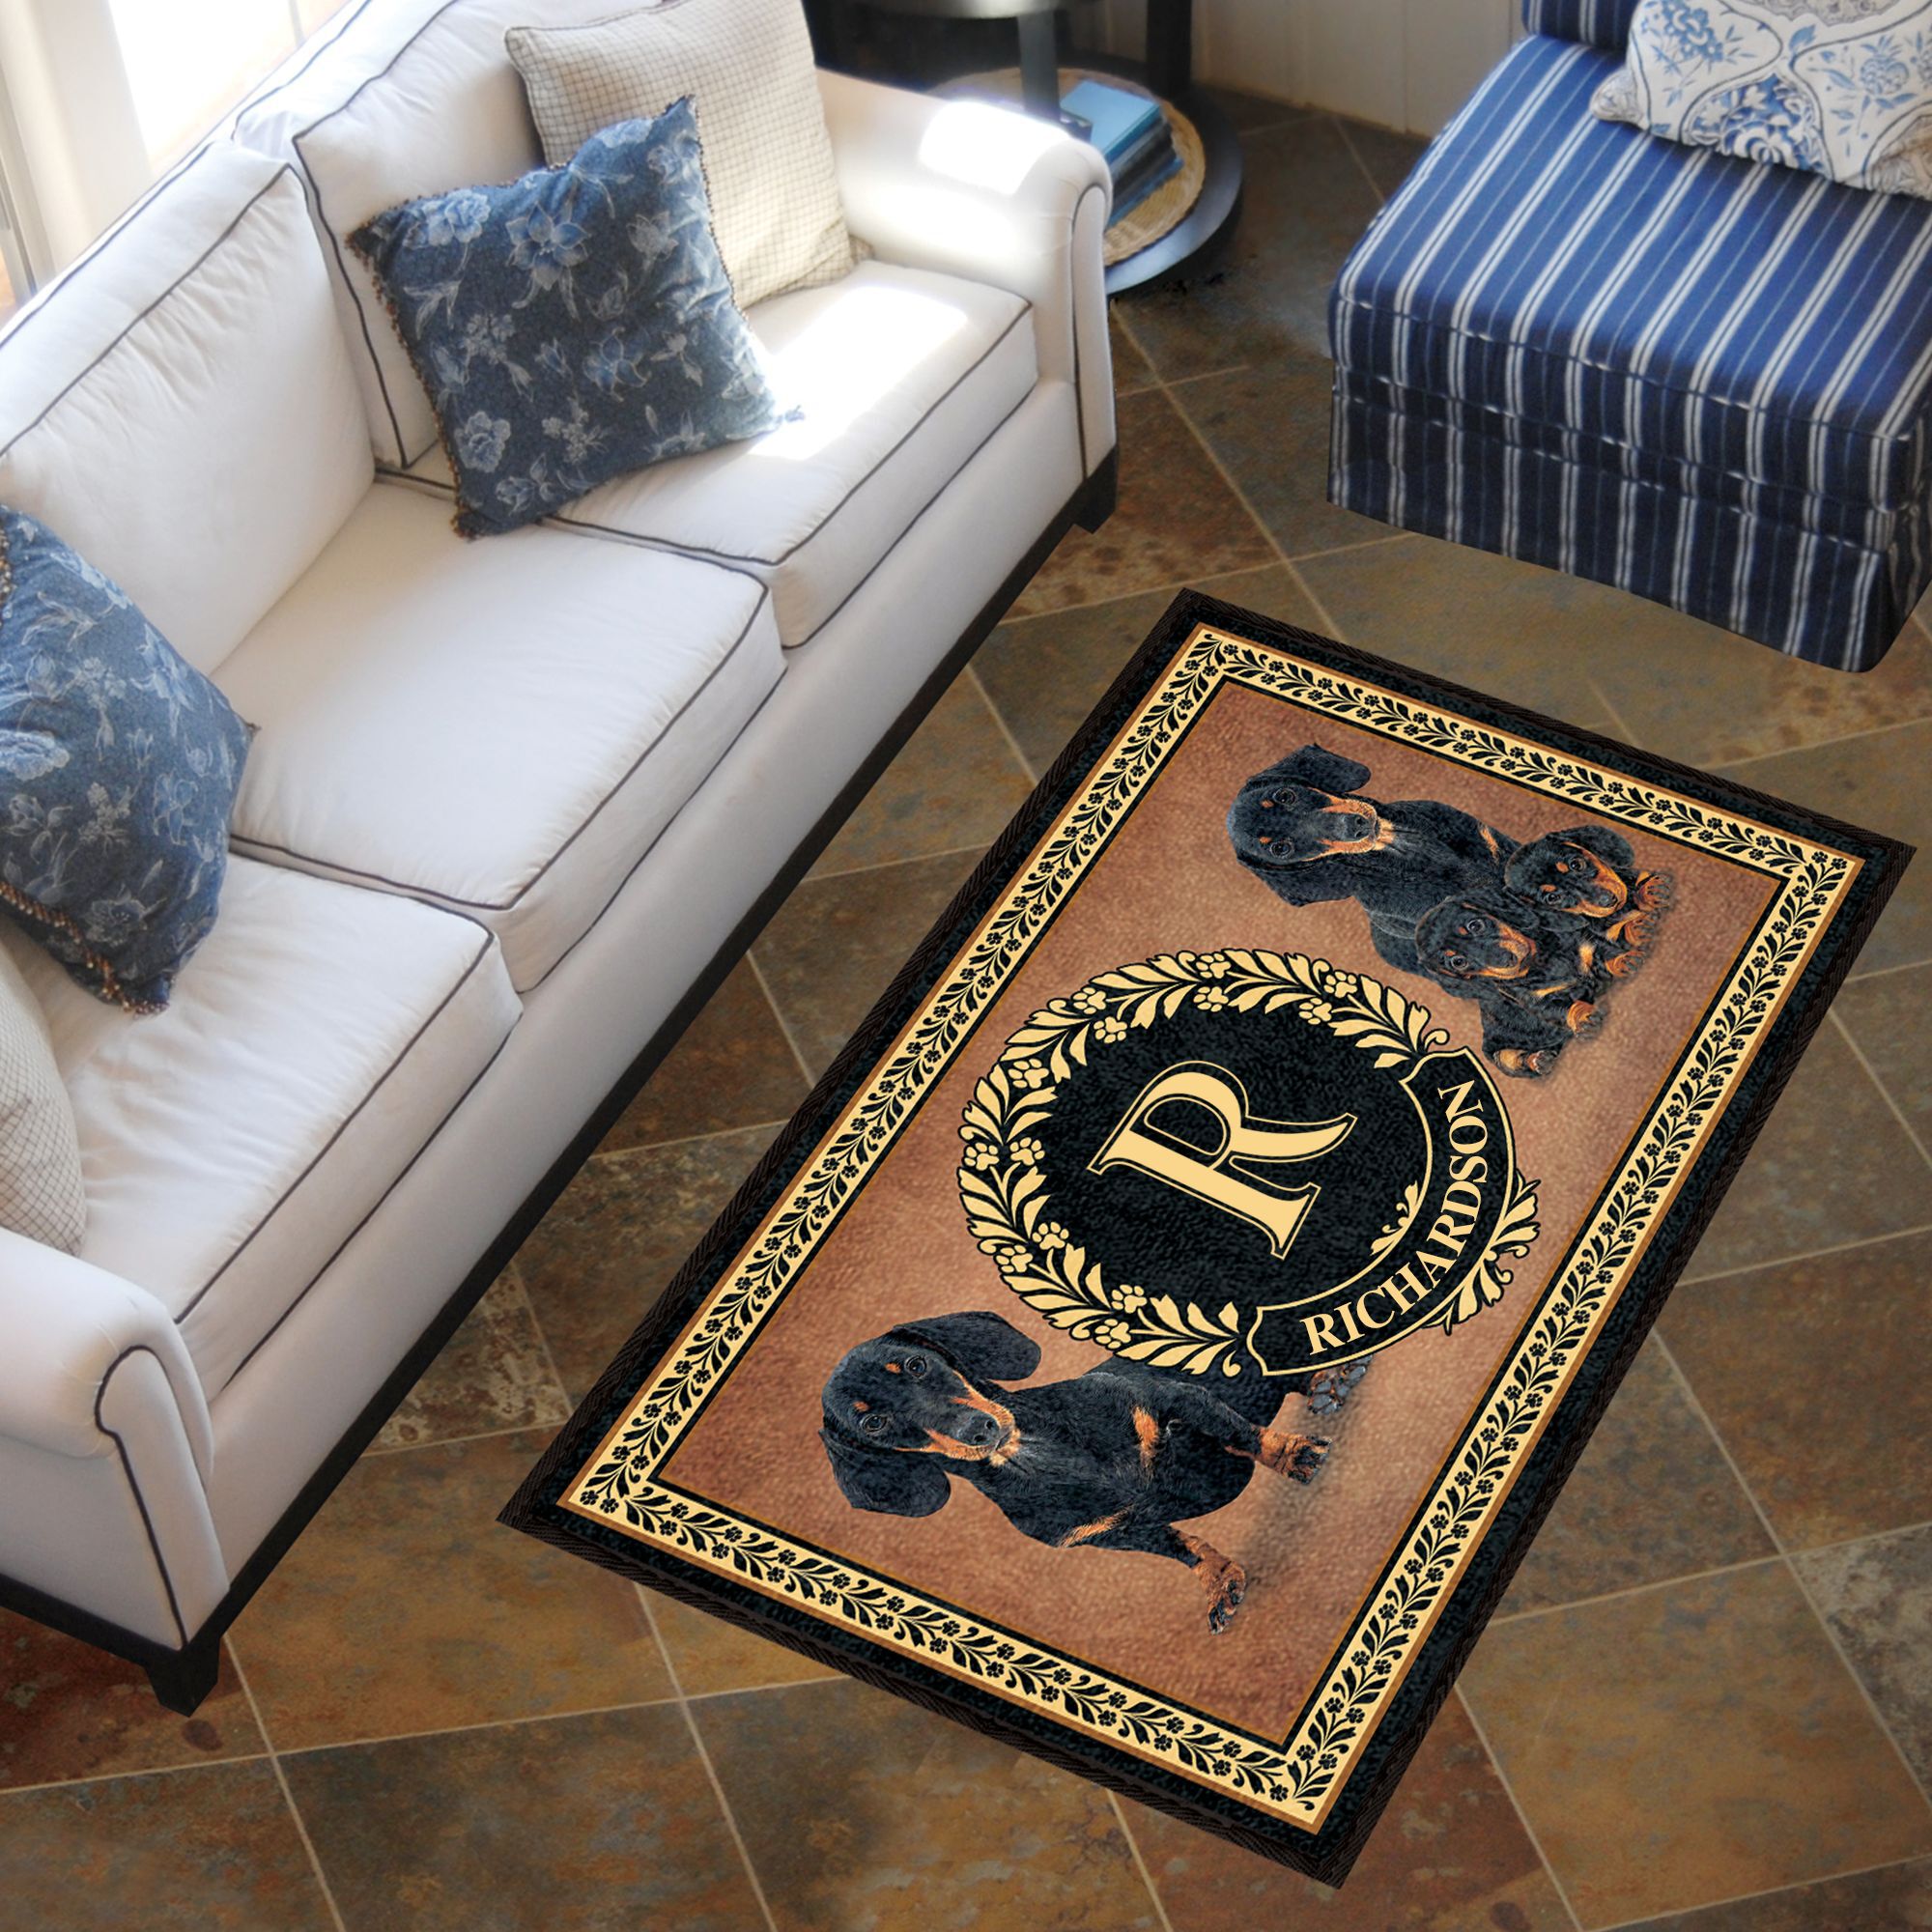 The Dog Accent Rug 6859 0033 c room